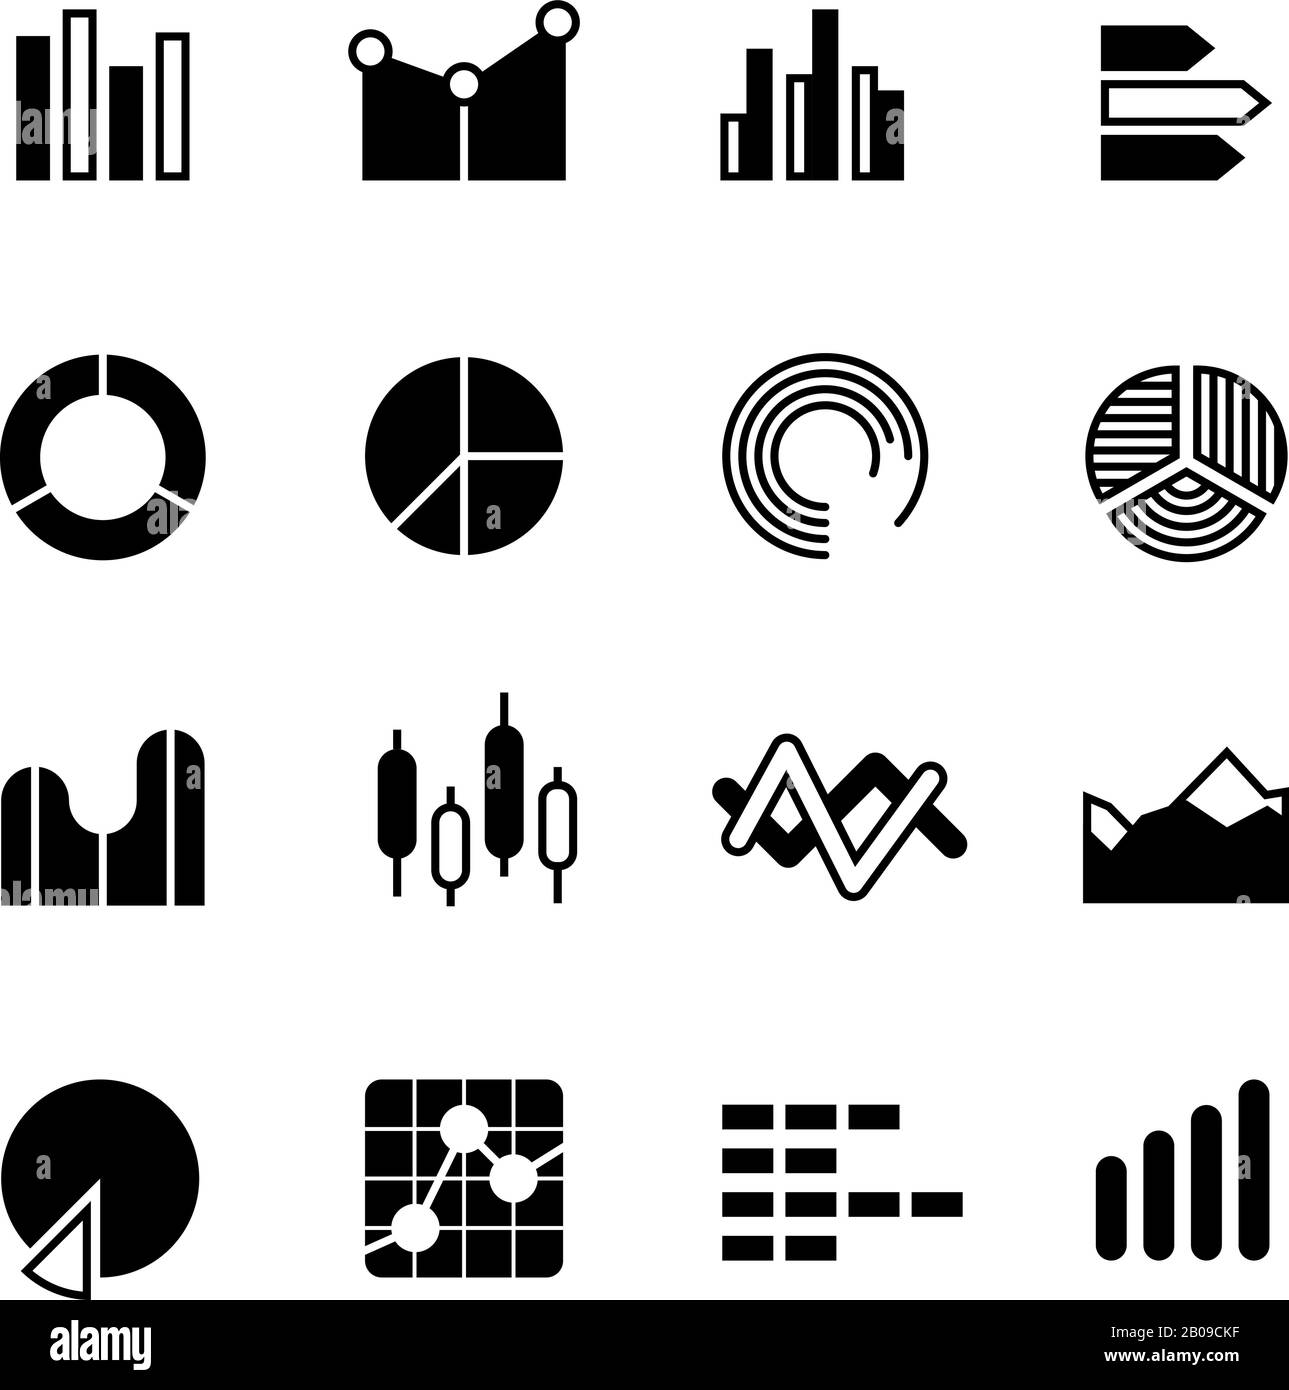 Graphic, graph, stats data bar, infographic charts, analyze diagram vector icons. Infographic statistic data, analysis infographic black silhouette illustration Stock Vector